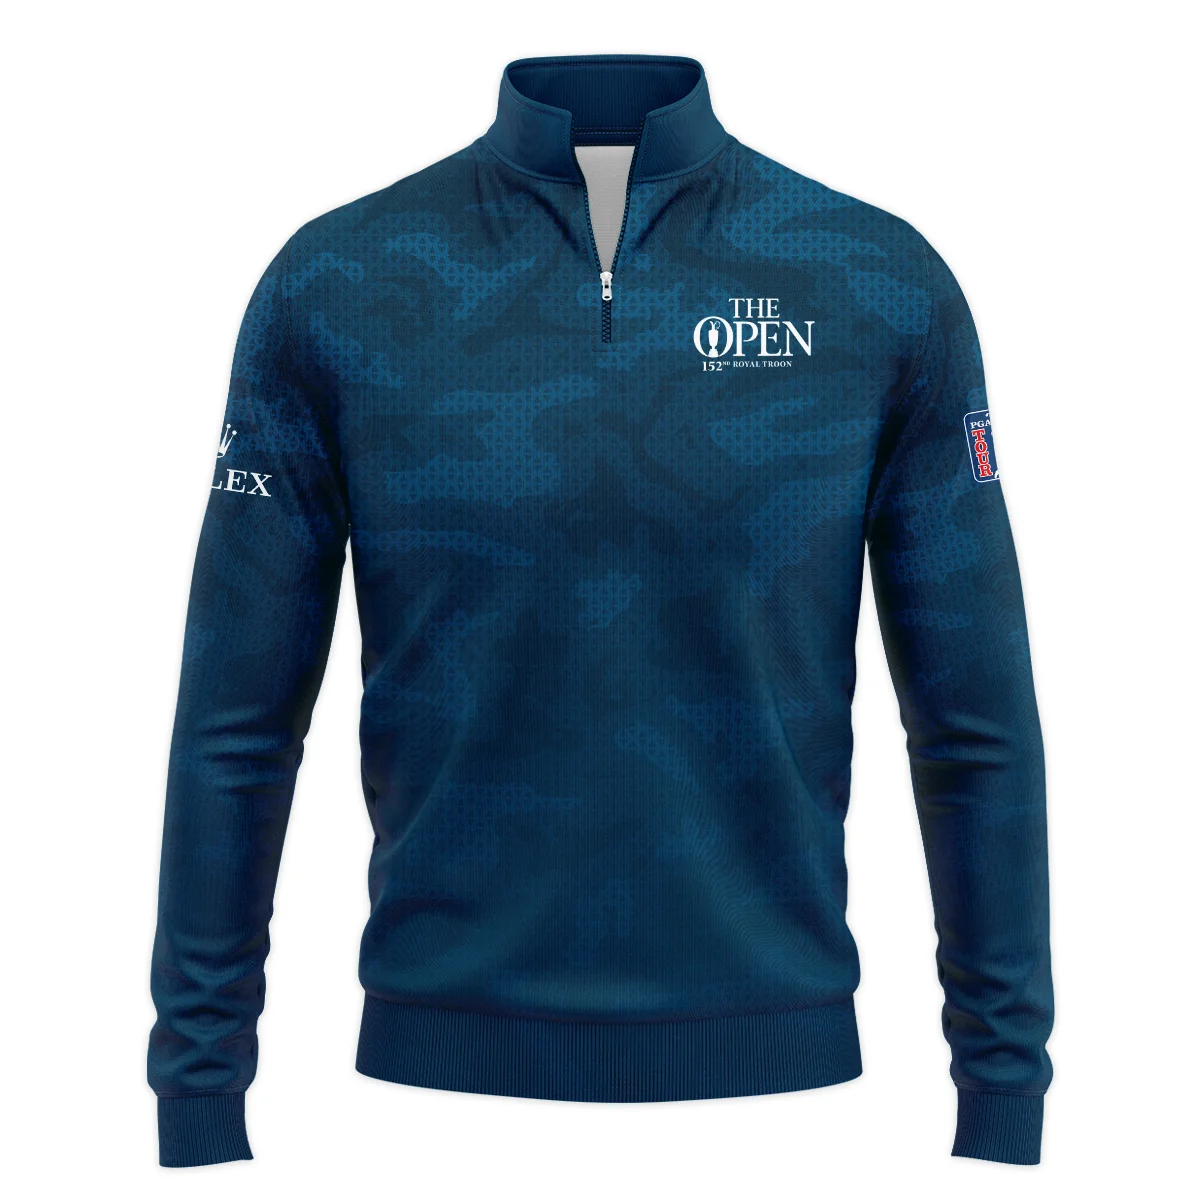 Rolex 152nd Open Championship Dark Blue Abstract Background Quarter-Zip Jacket All Over Prints HOTOP260624A02ROXSWZ